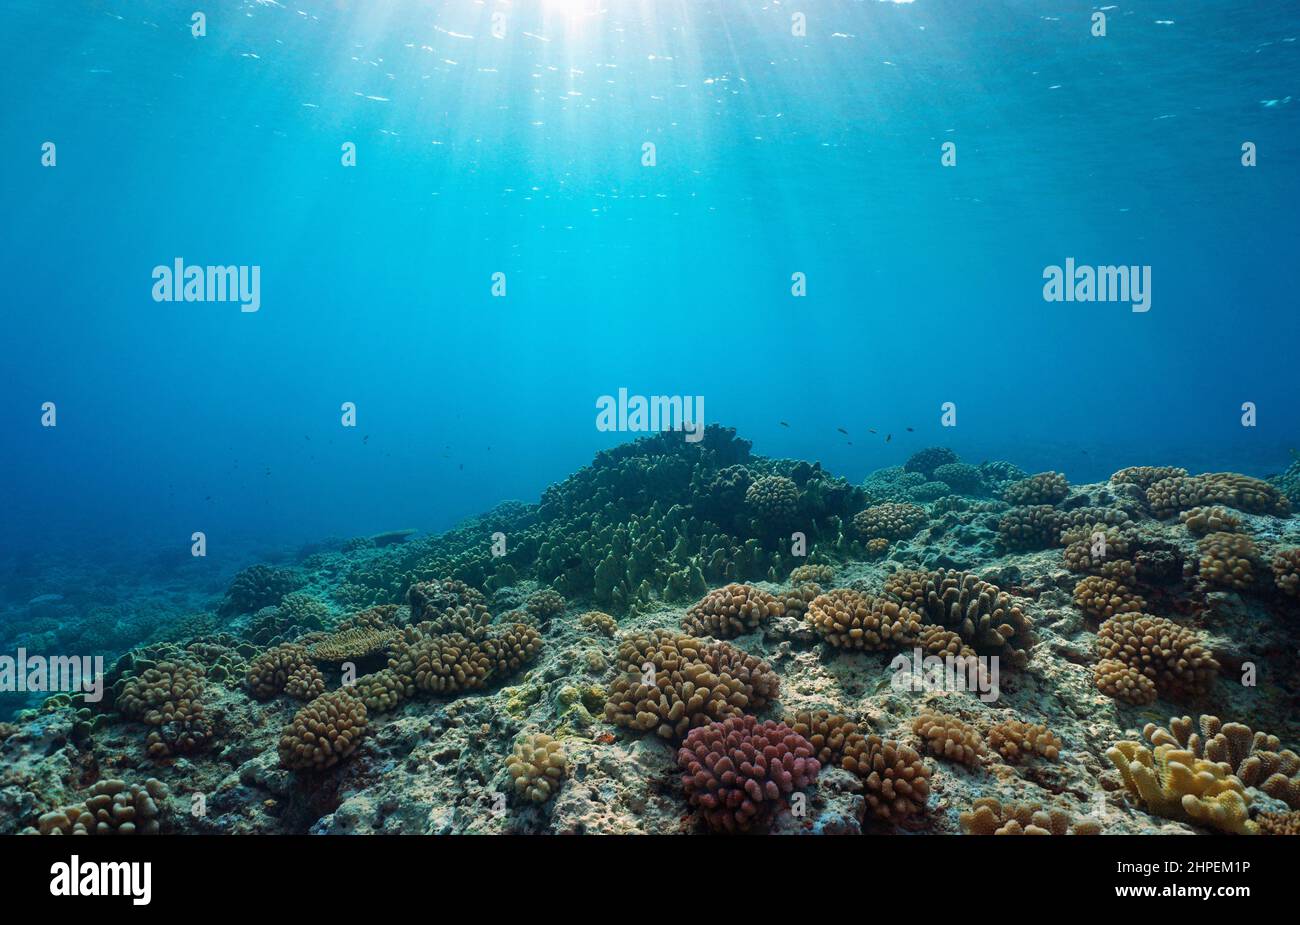 Coral reef ocean floor and natural sunlight underwater seascape, Pacific ocean, French Polynesia Stock Photo